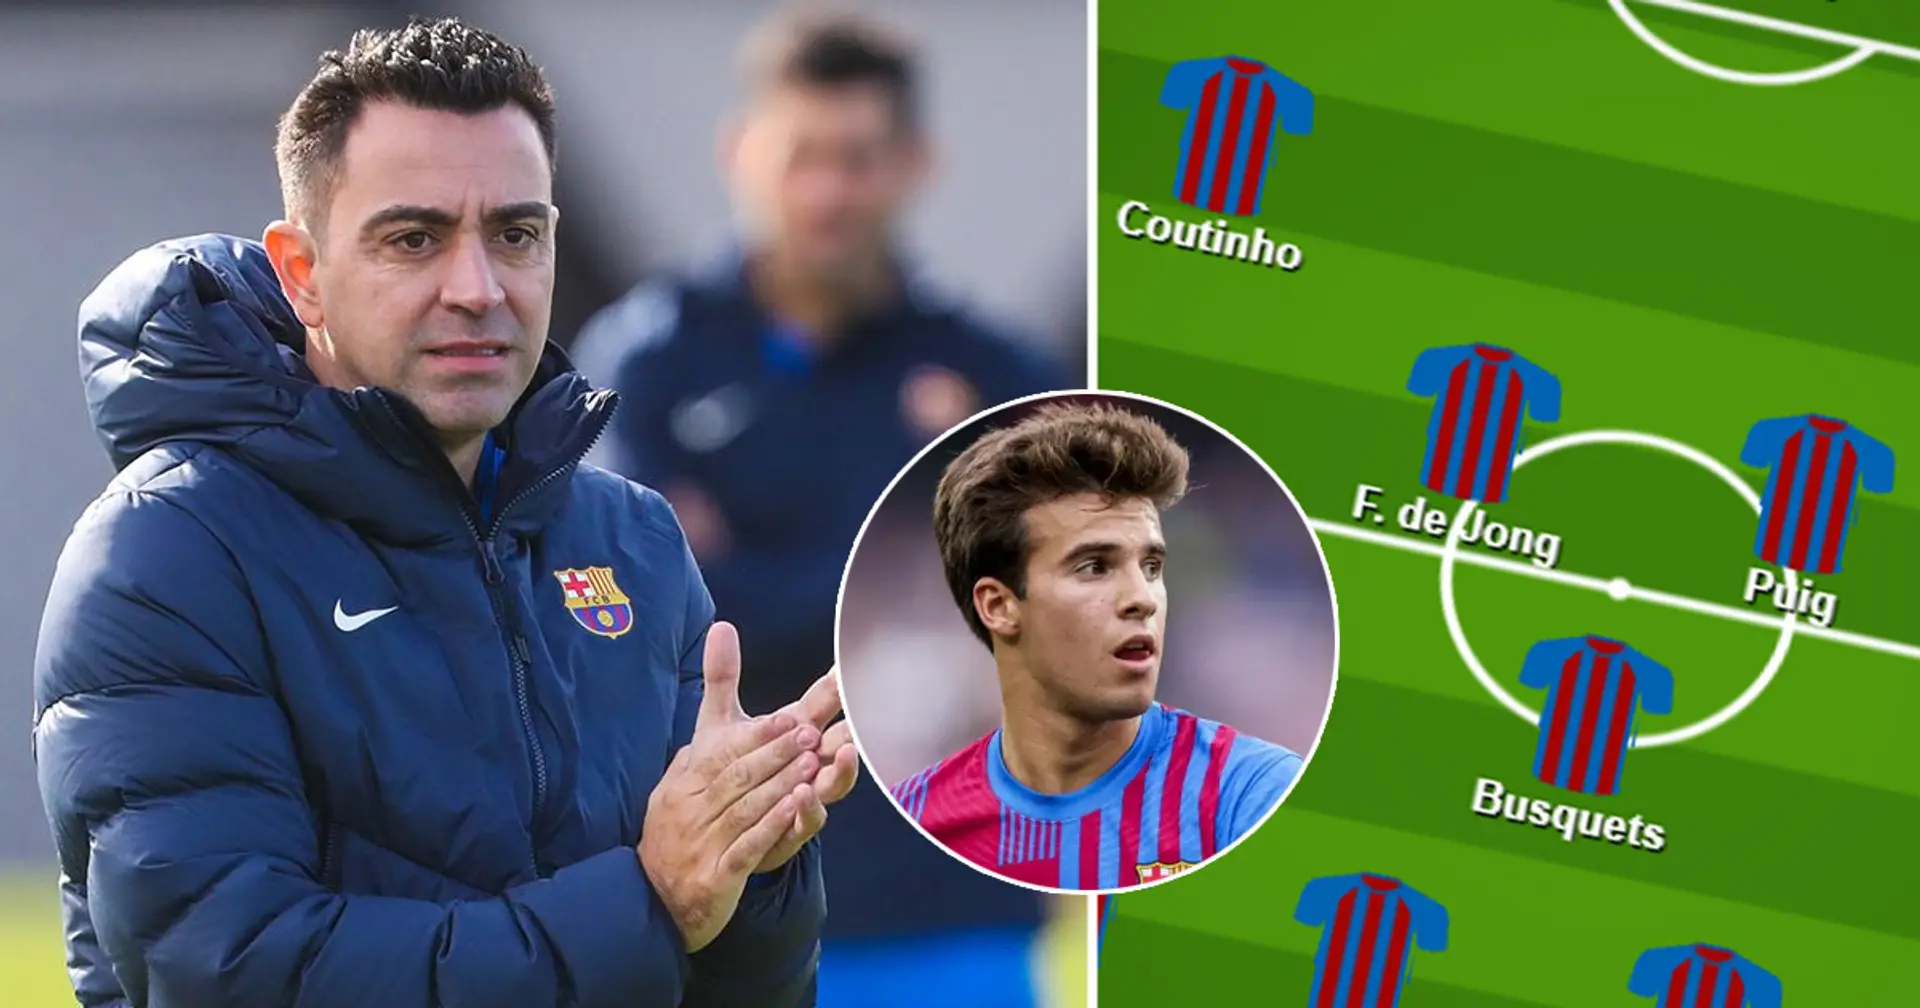 Riqui Puig to start?: select Barca's ultimate XI for Espanyol clash from 3 options